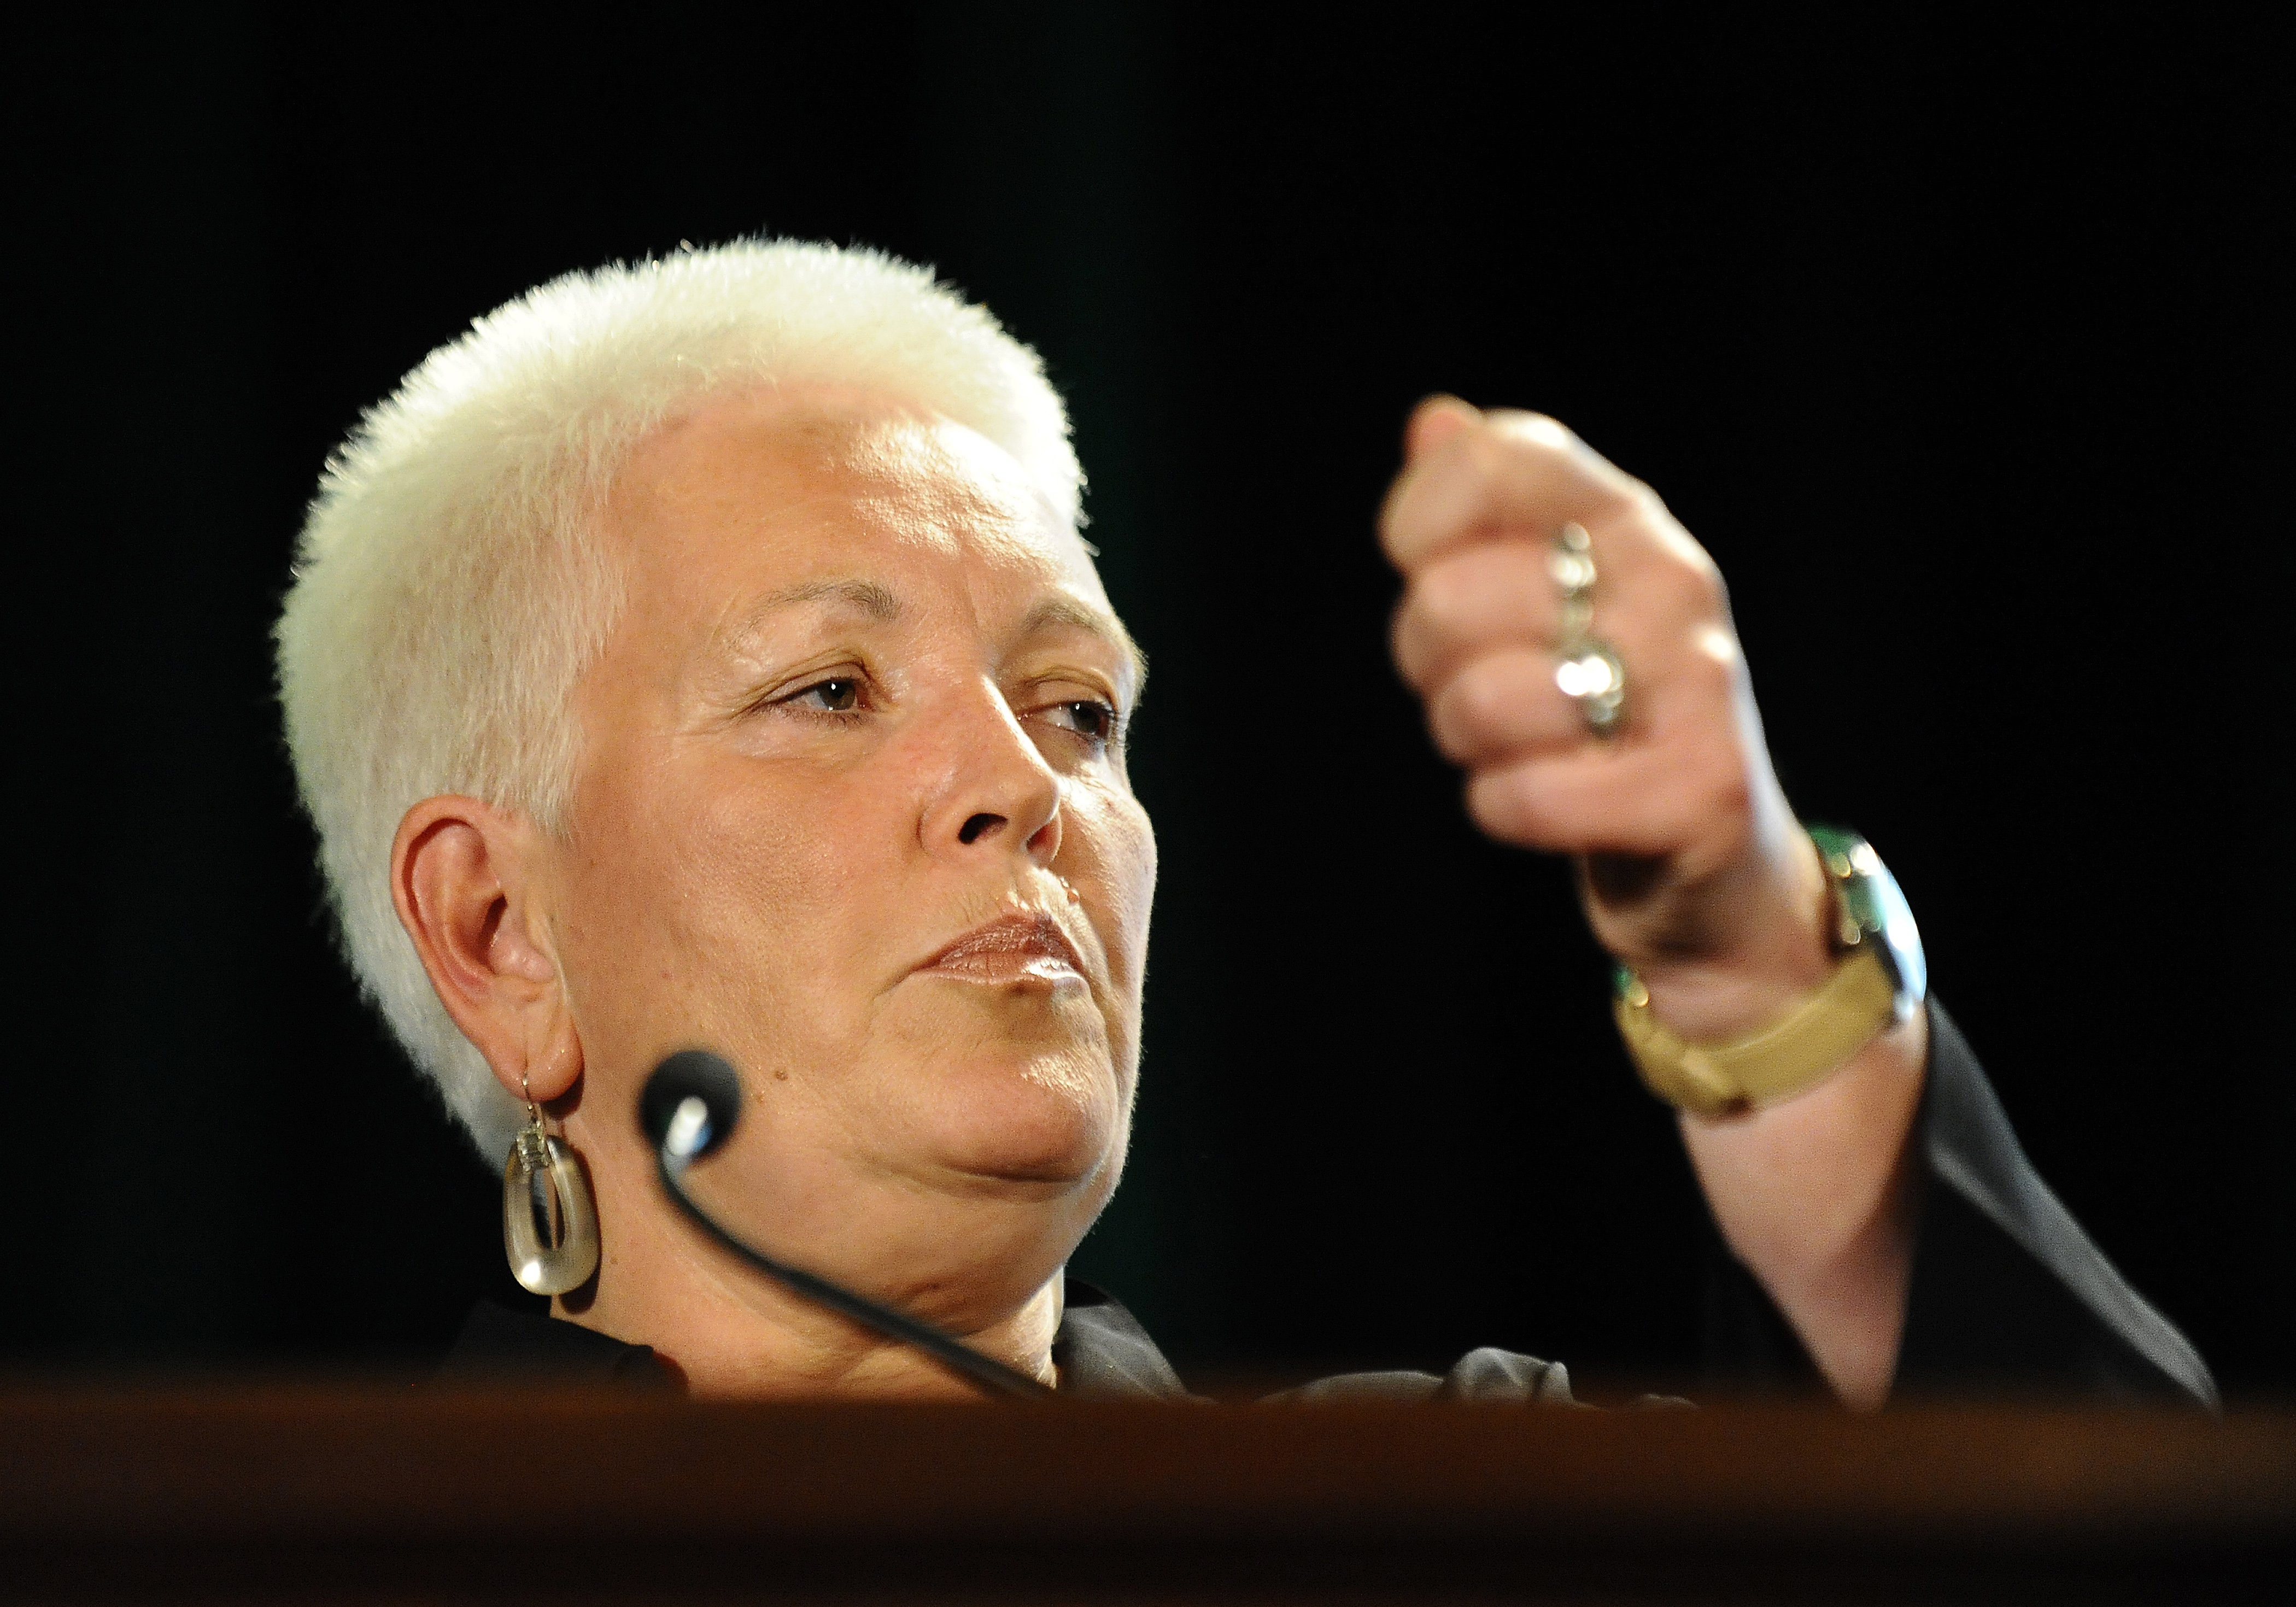 Gayle Smith, special assistant to President Obama and senior director at the National Security Council, speaks during the Society for International Development (SID) World Congress in Washington, DC, on July 29, 2011. (Jewel Samad—AFP/Getty Images)